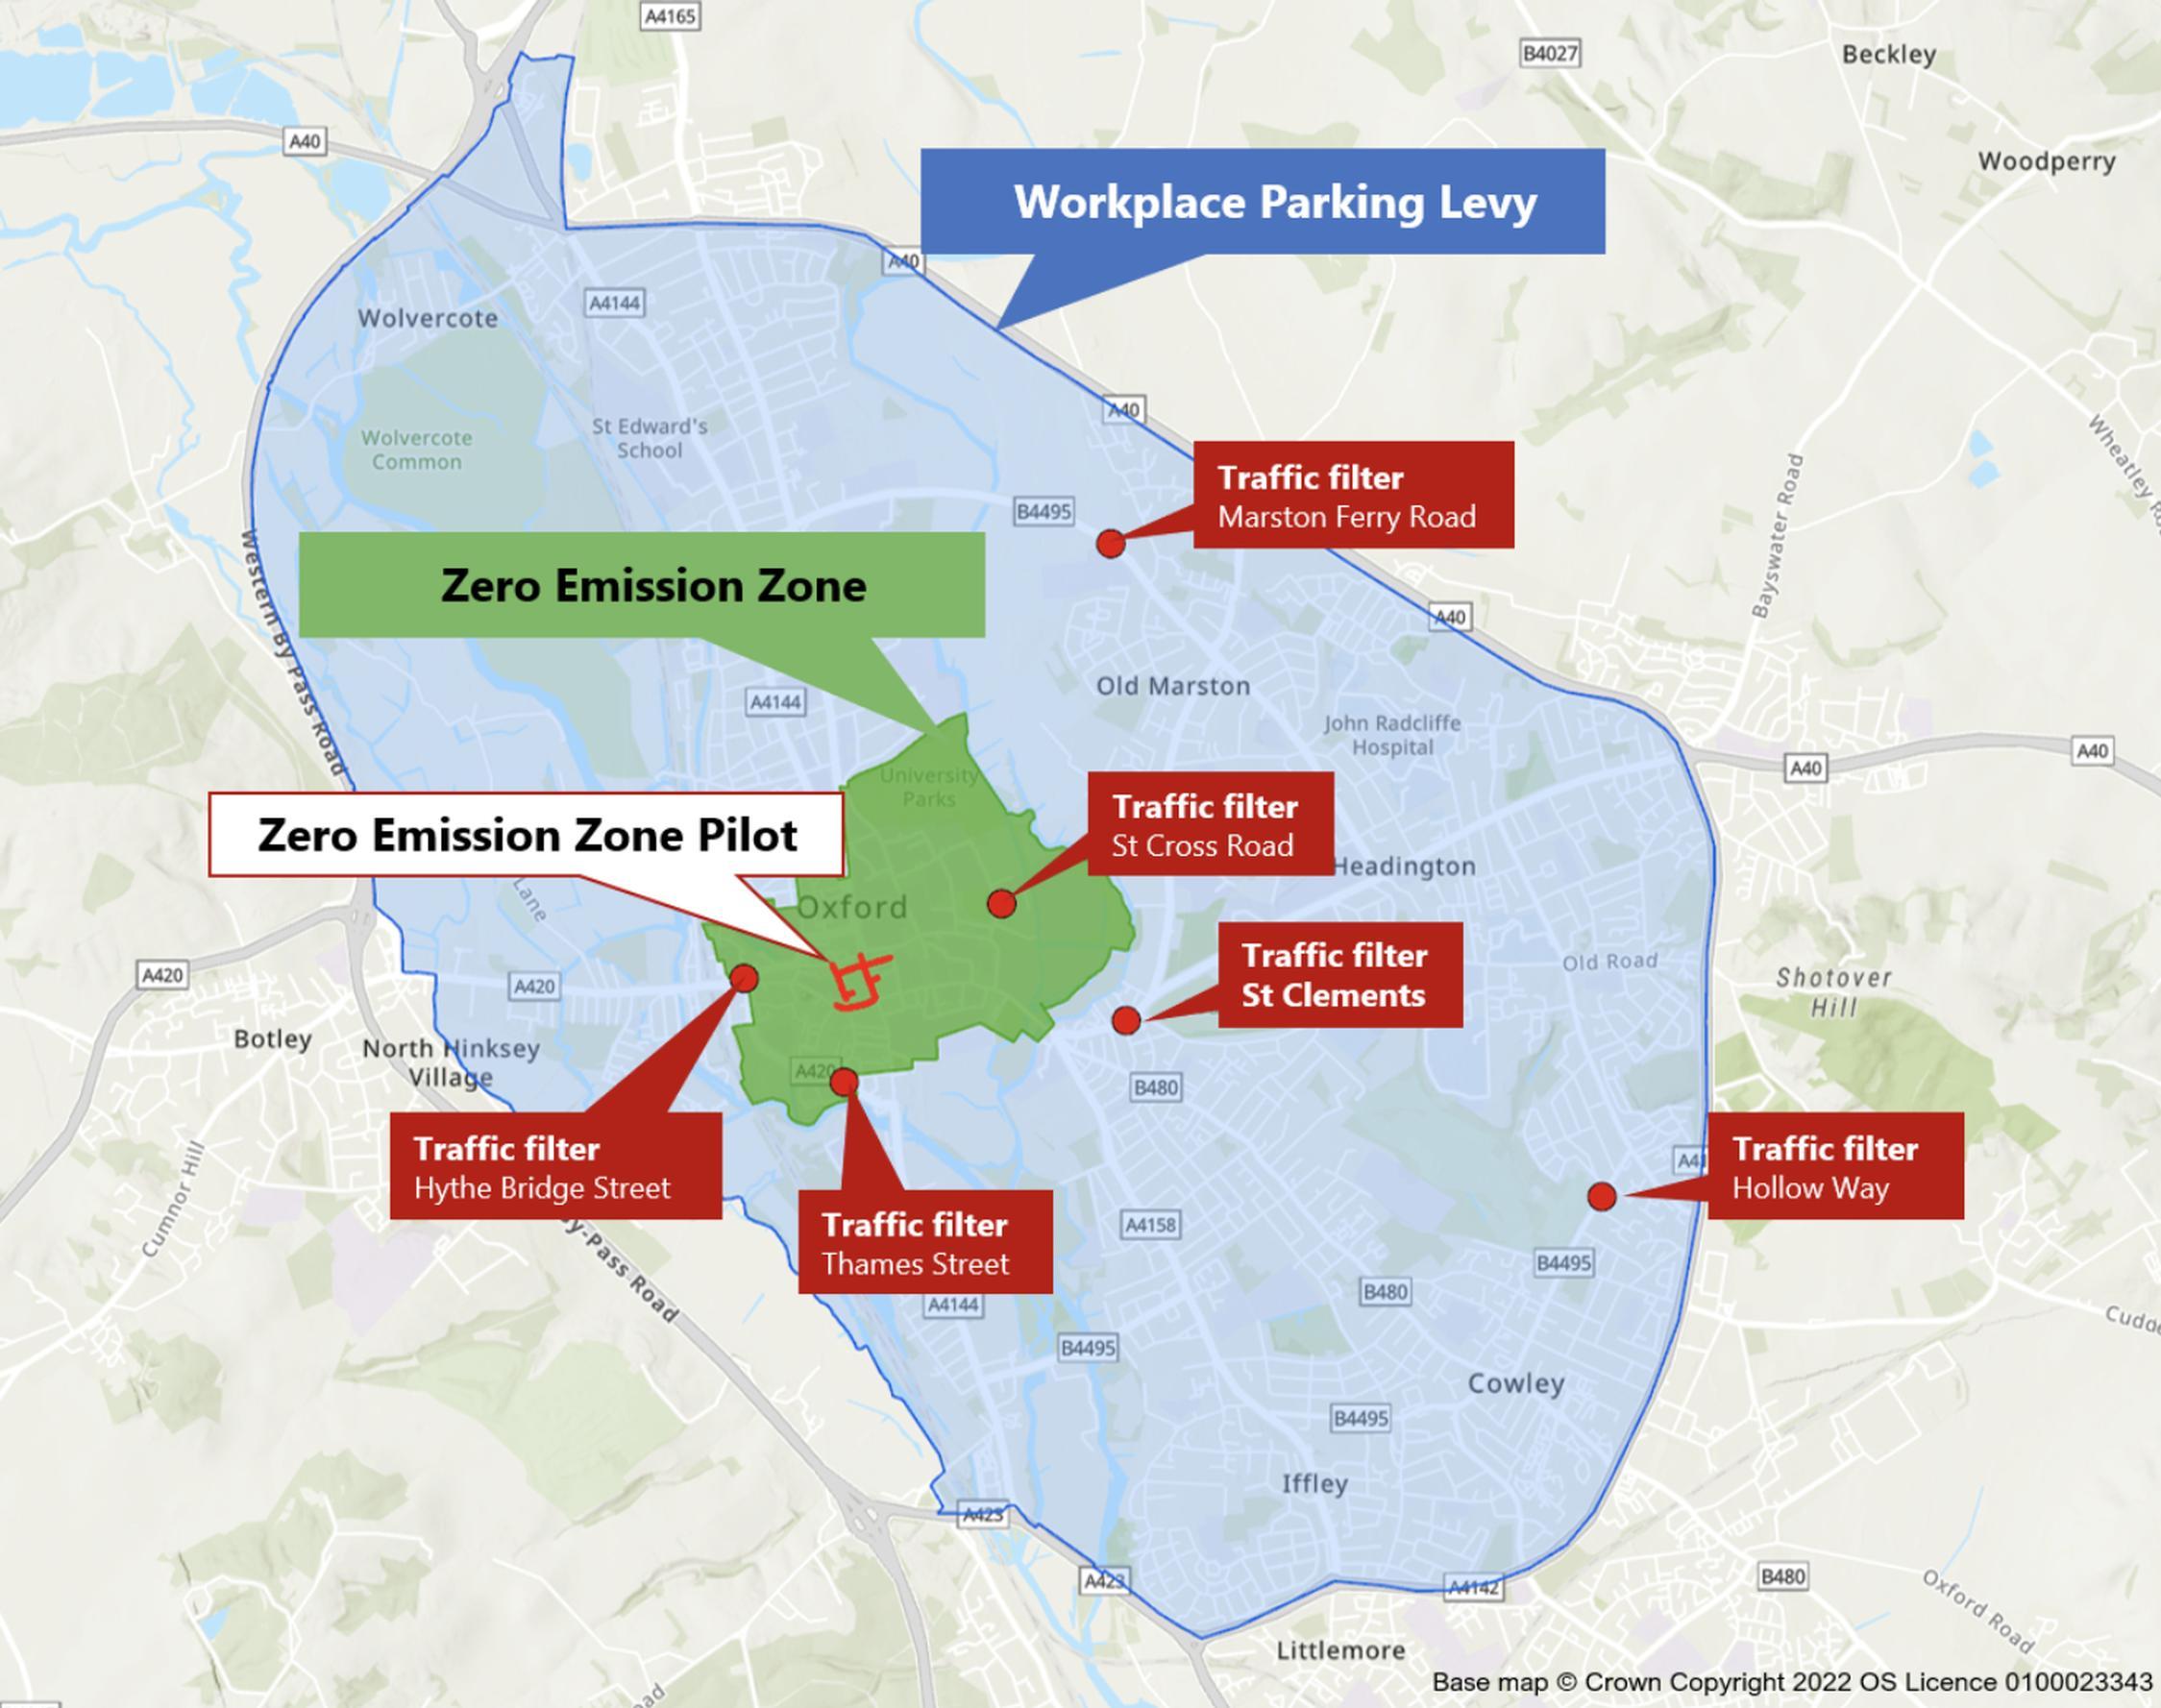 A workplace parking levy, zero emission zones and traffic filters feature in plans for Oxford